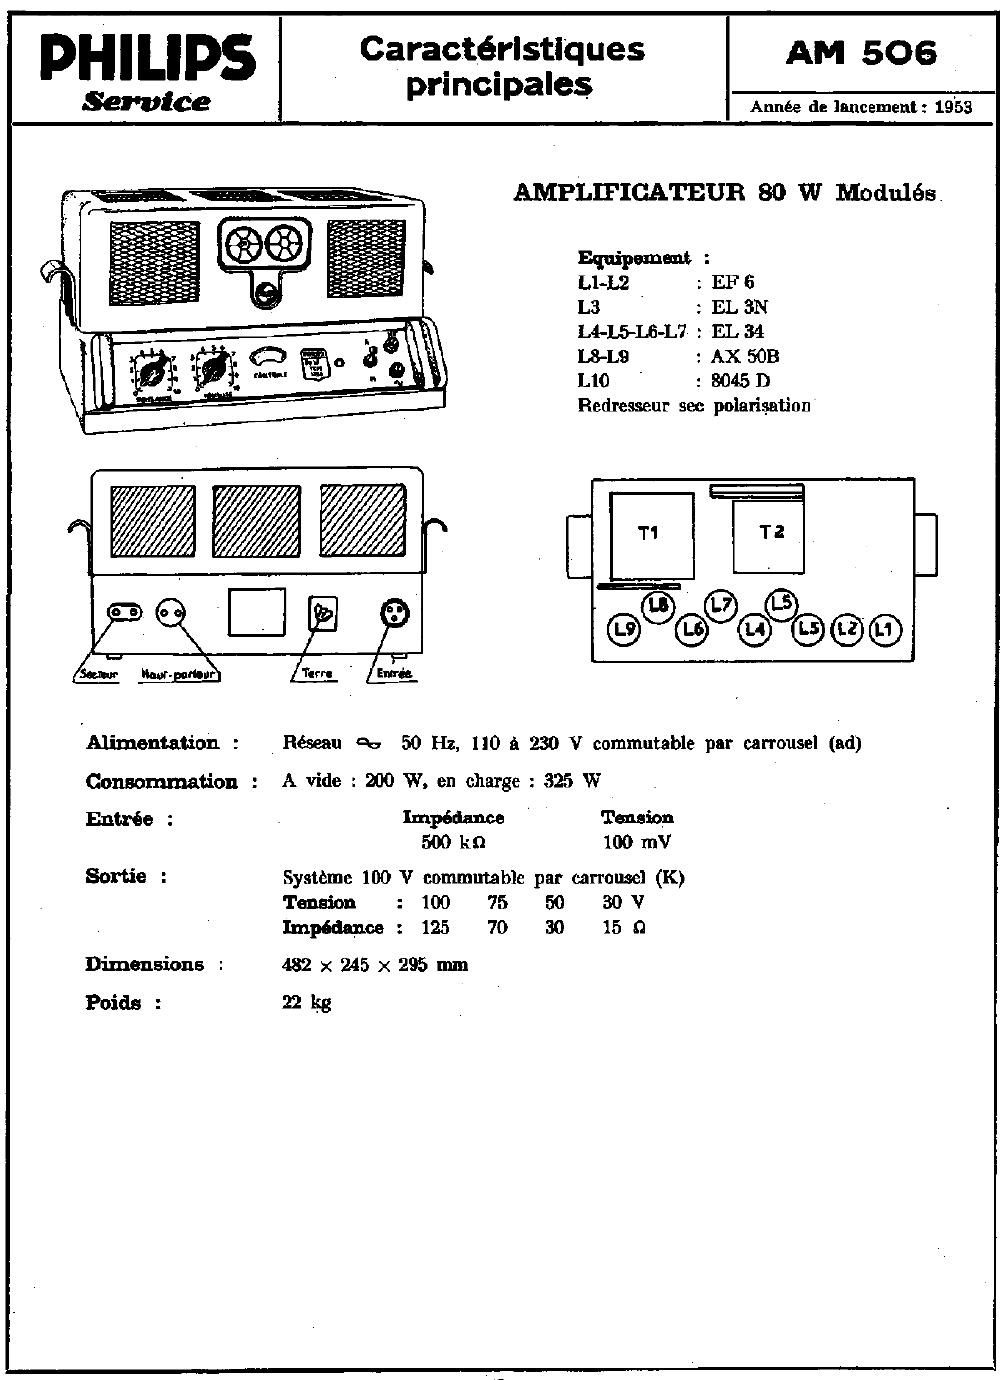 philips am 506 service manual